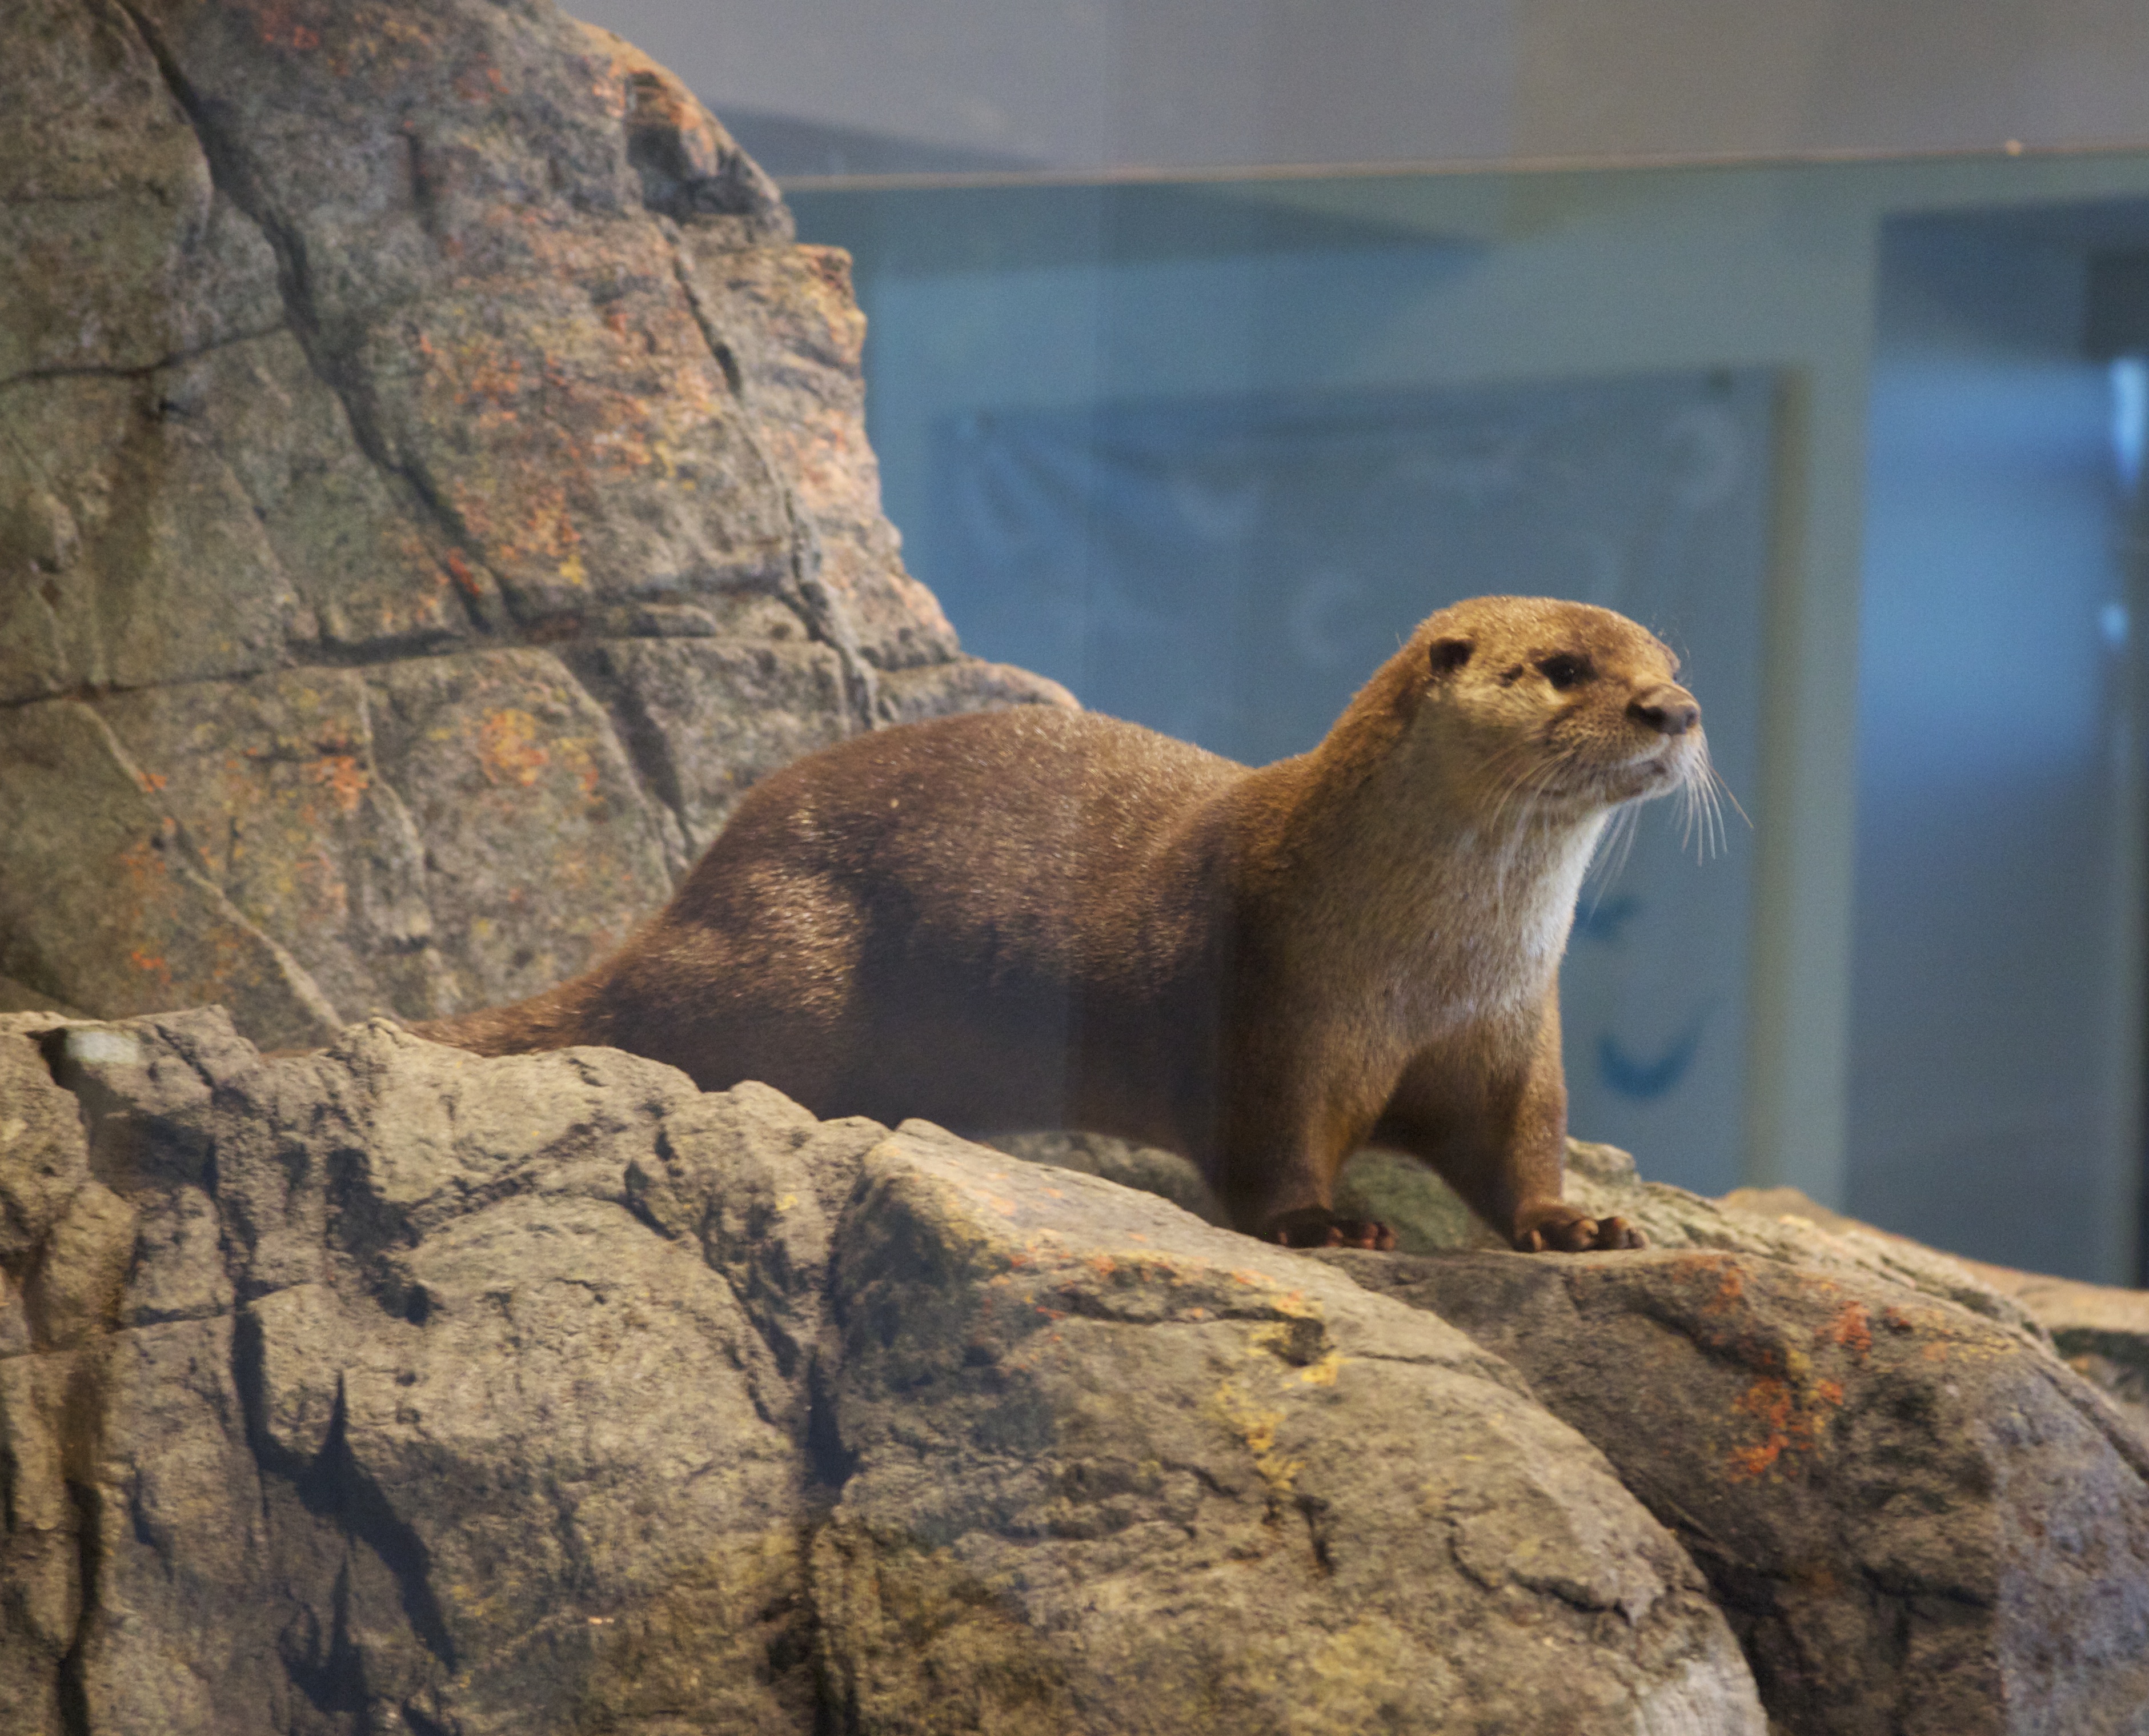 North American River Otters On Display at the Aquarium of the Bay, San Francisco